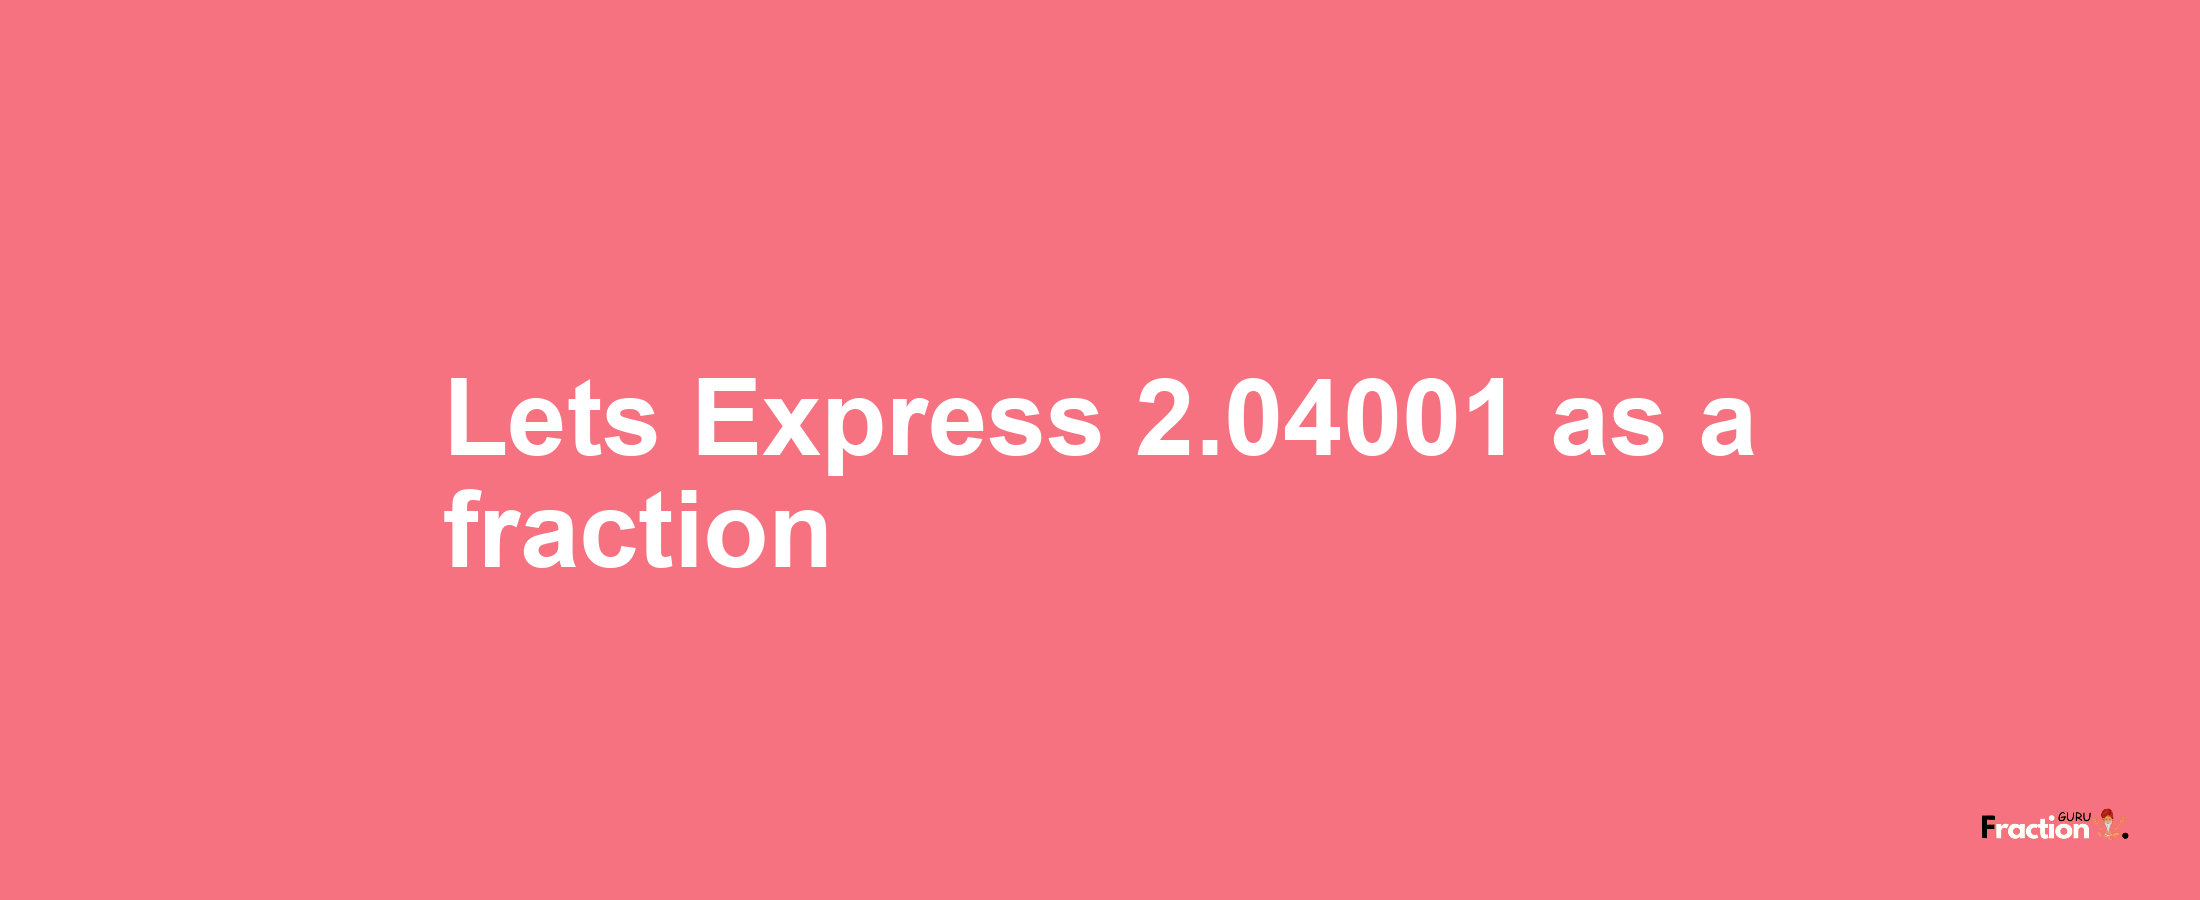 Lets Express 2.04001 as afraction